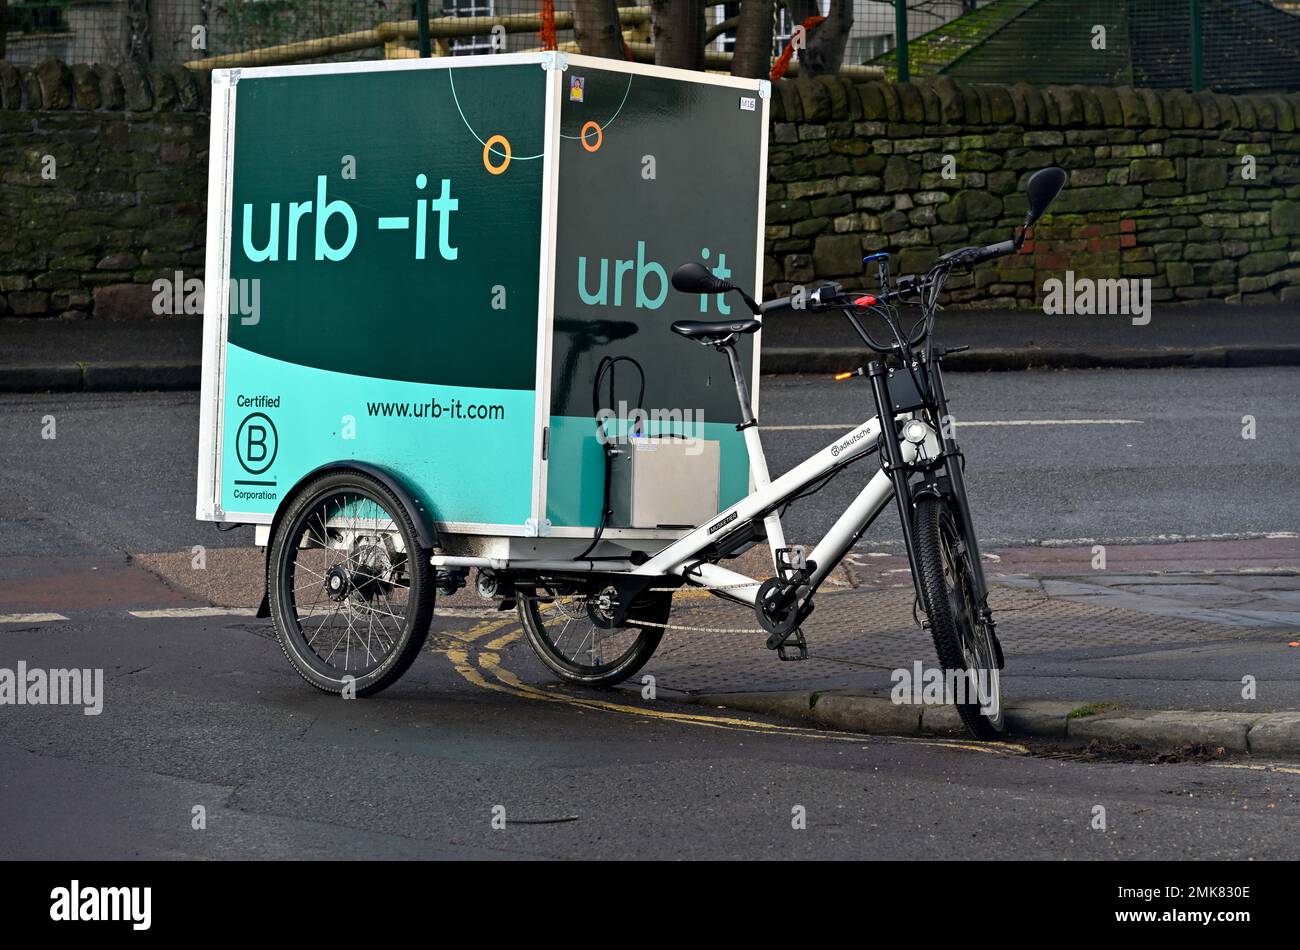 Cargo bike used for delivering parcels by cycle courier urb-it illegally parked on double yellow lines directly on corner and blocking pedestrian acce Stock Photo